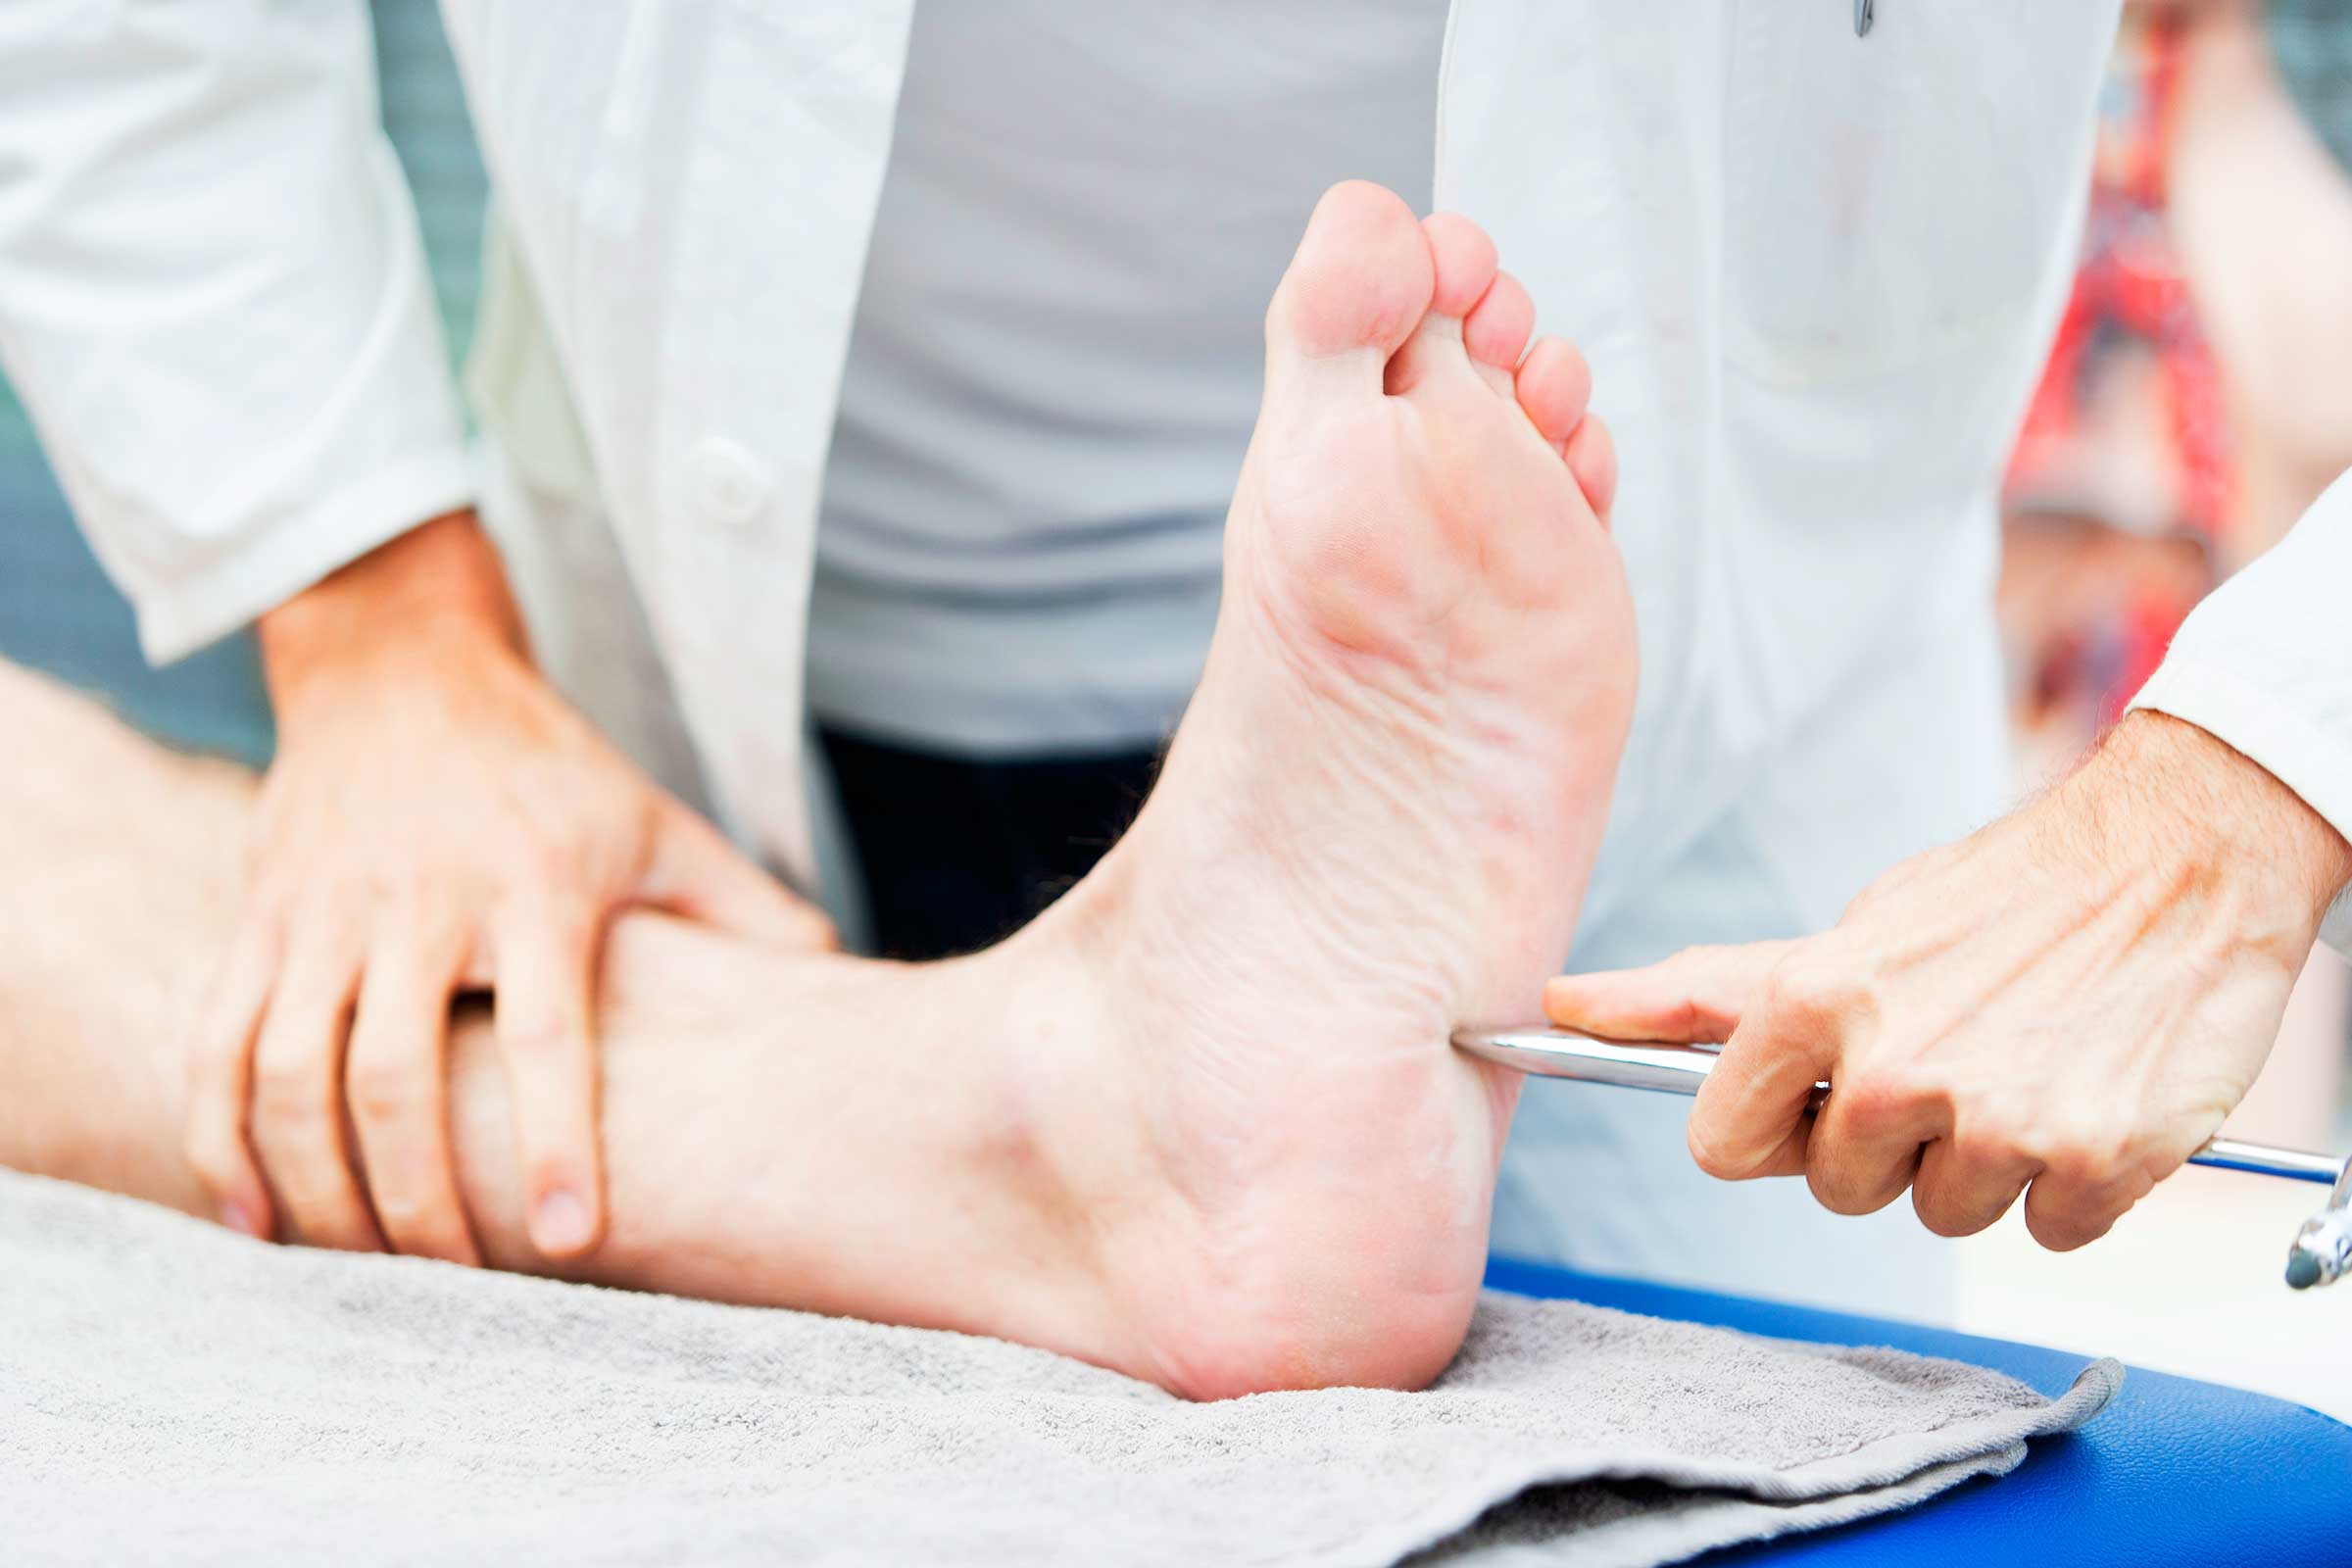 What Is Diabetic Neuropathy? Key Facts to Know